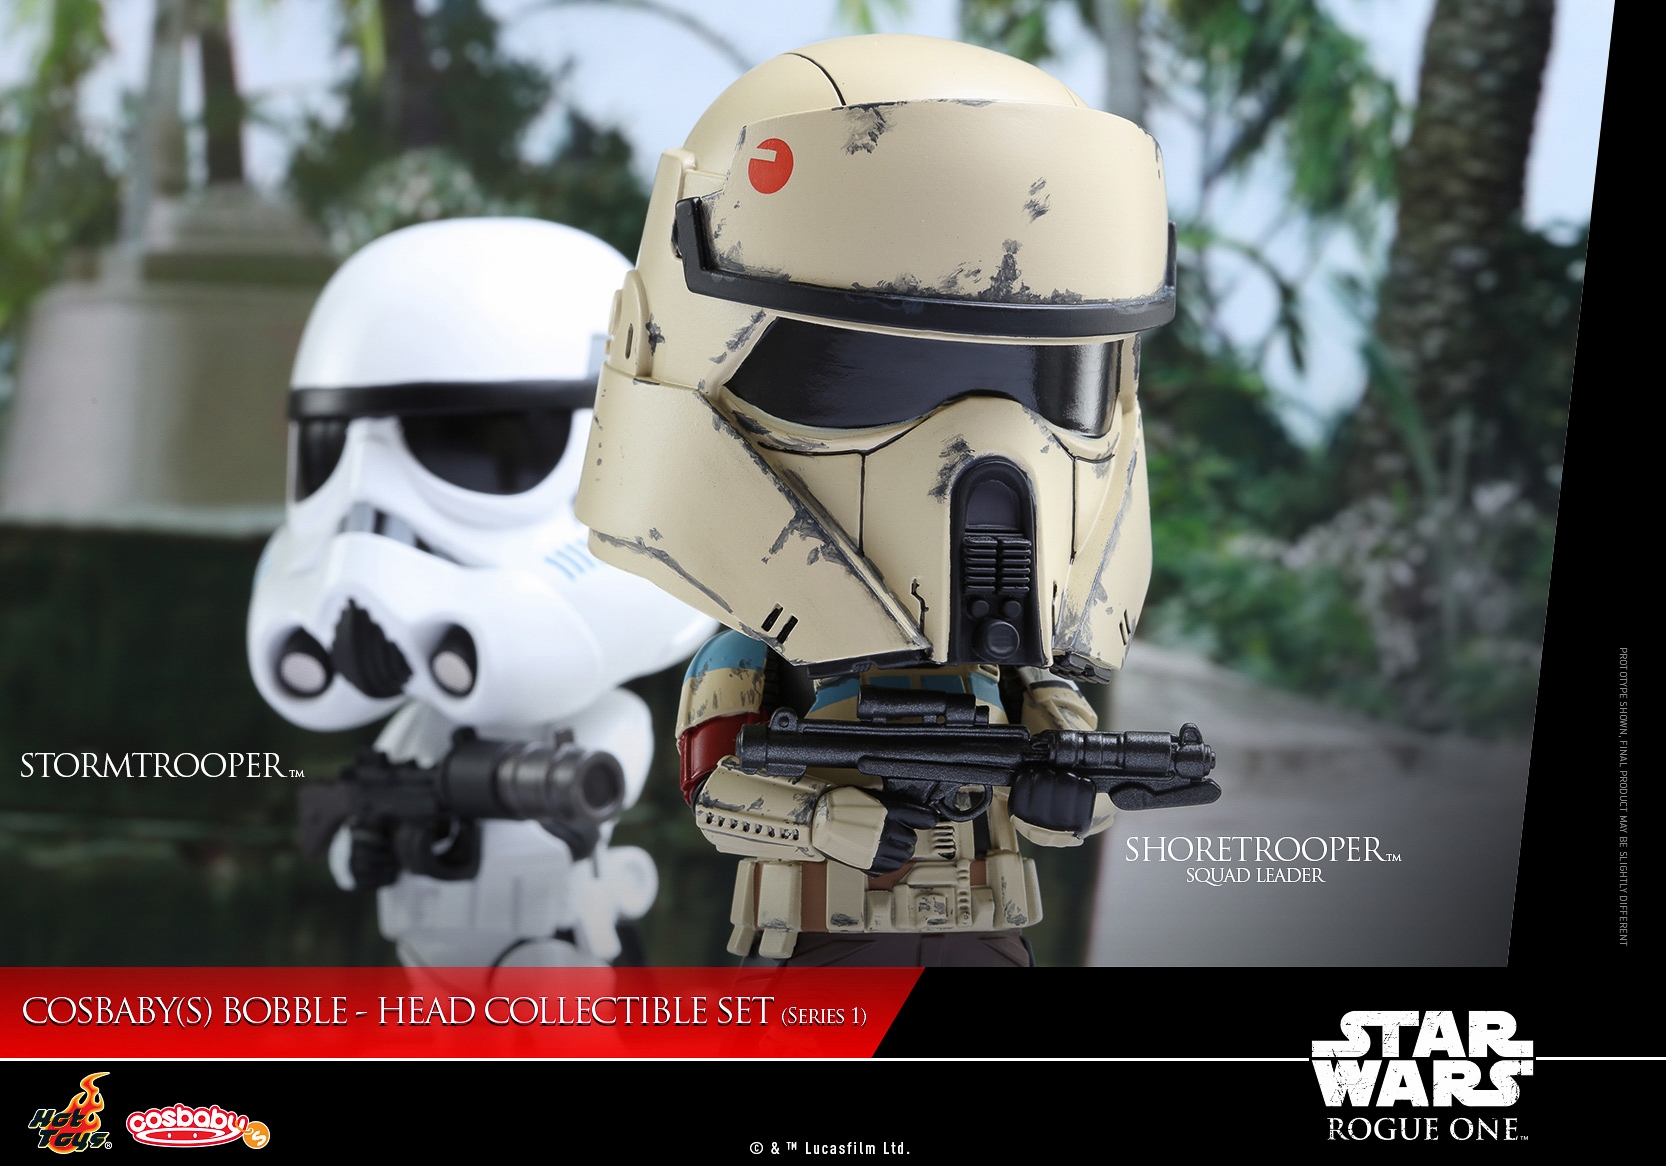 Hot-Toys-Rogue-One-Cosbaby-Series-1-007.jpg